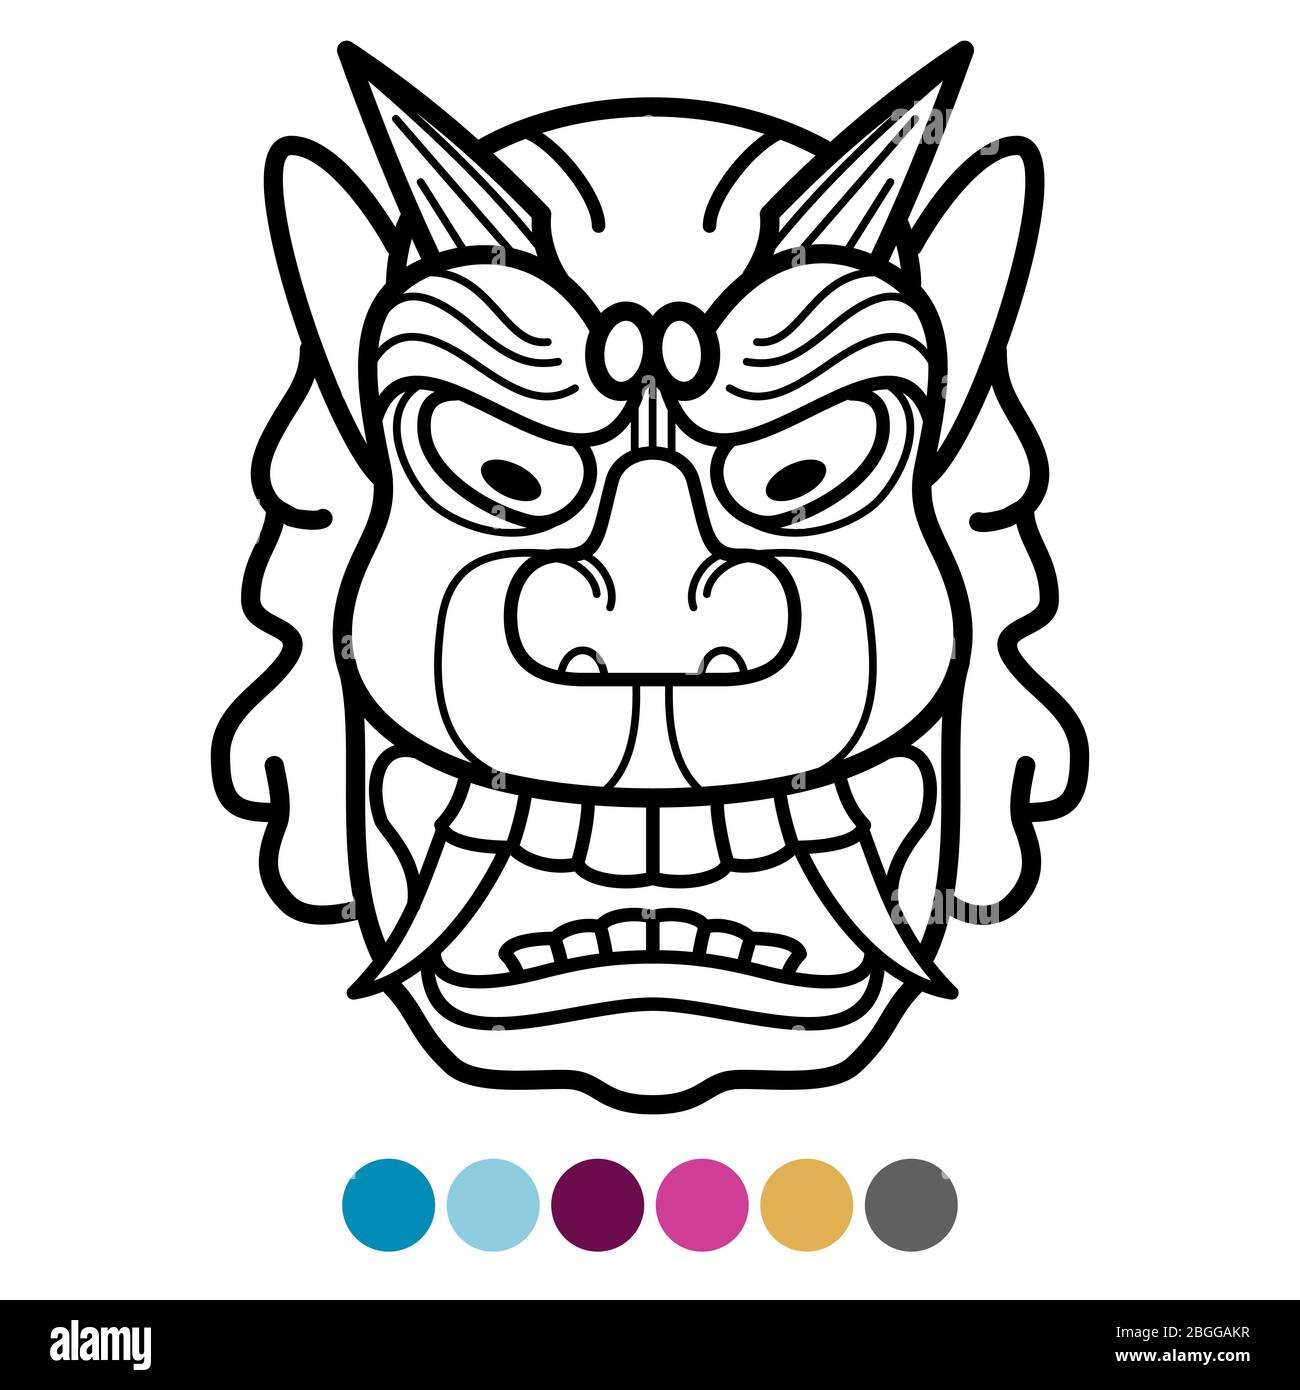 lion mask coloring page